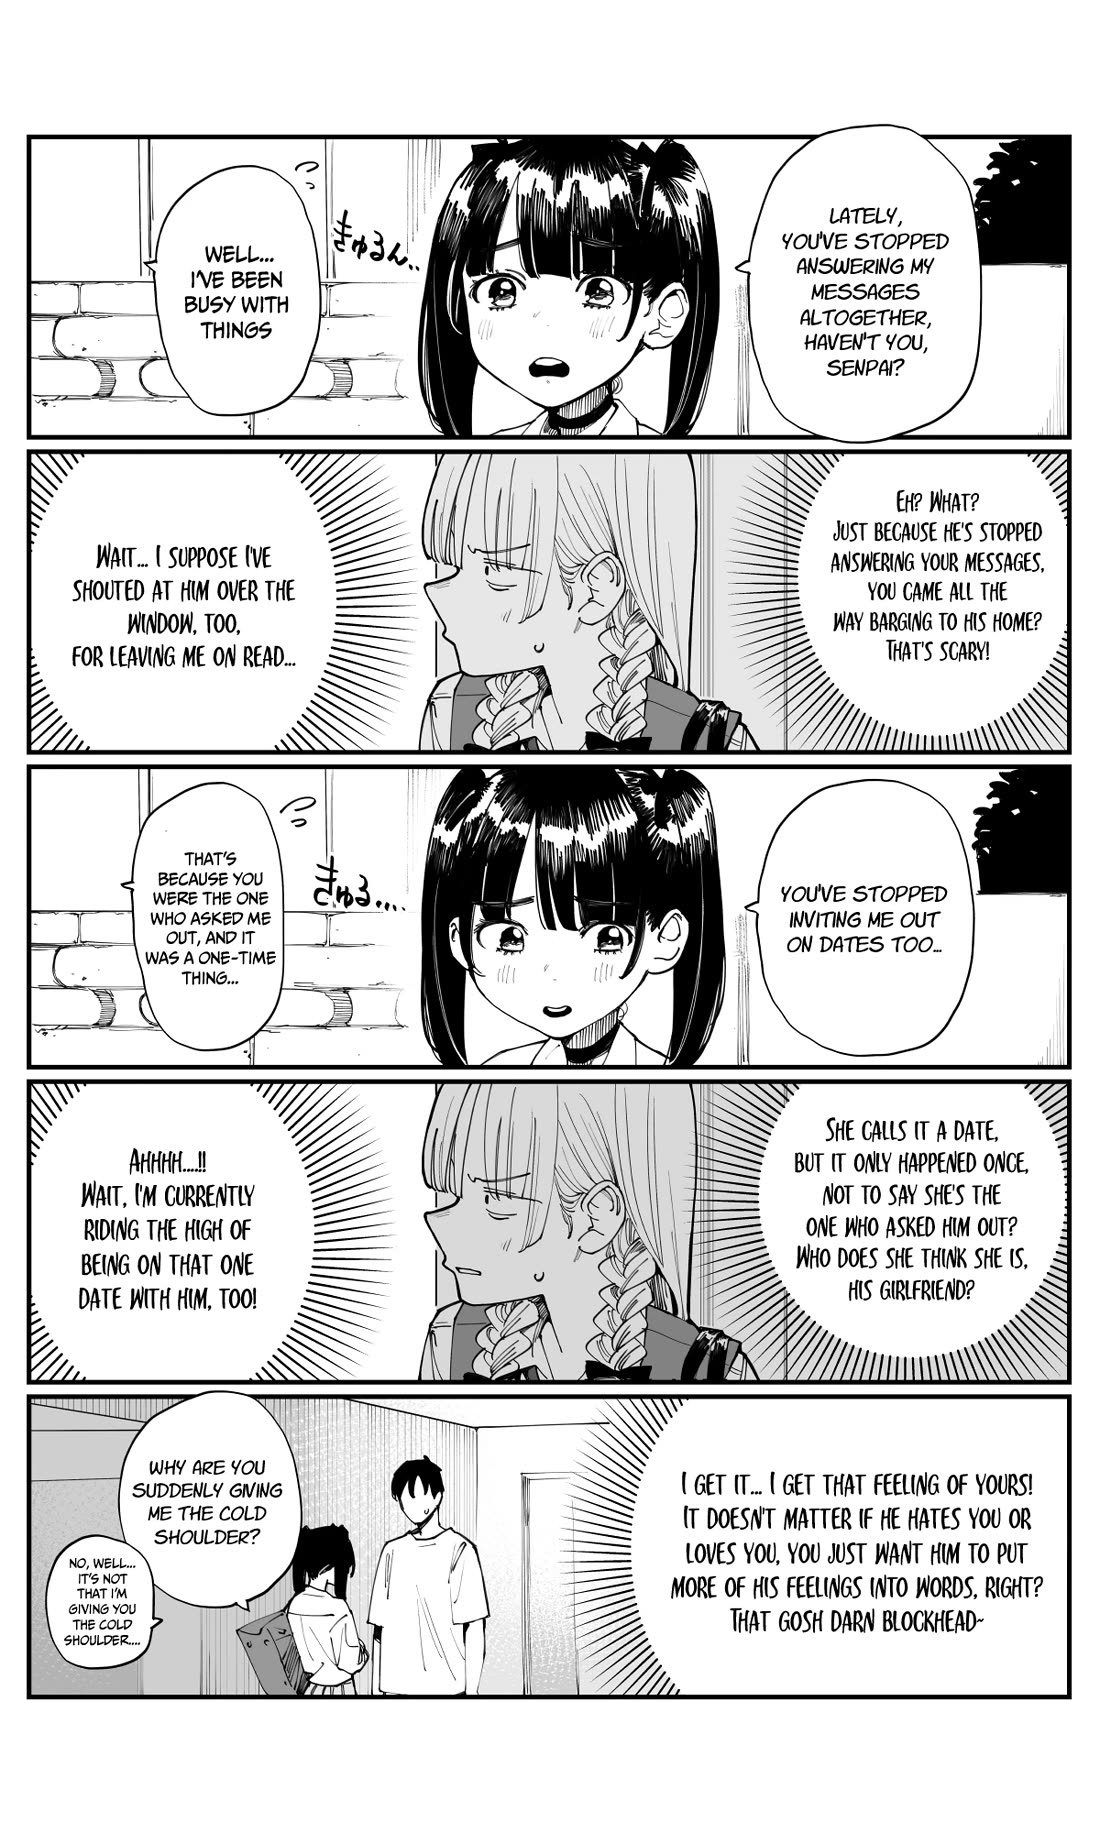 It's Quite Late, but I've Fallen in Love with My Childhood Friend - chapter 12 - #2